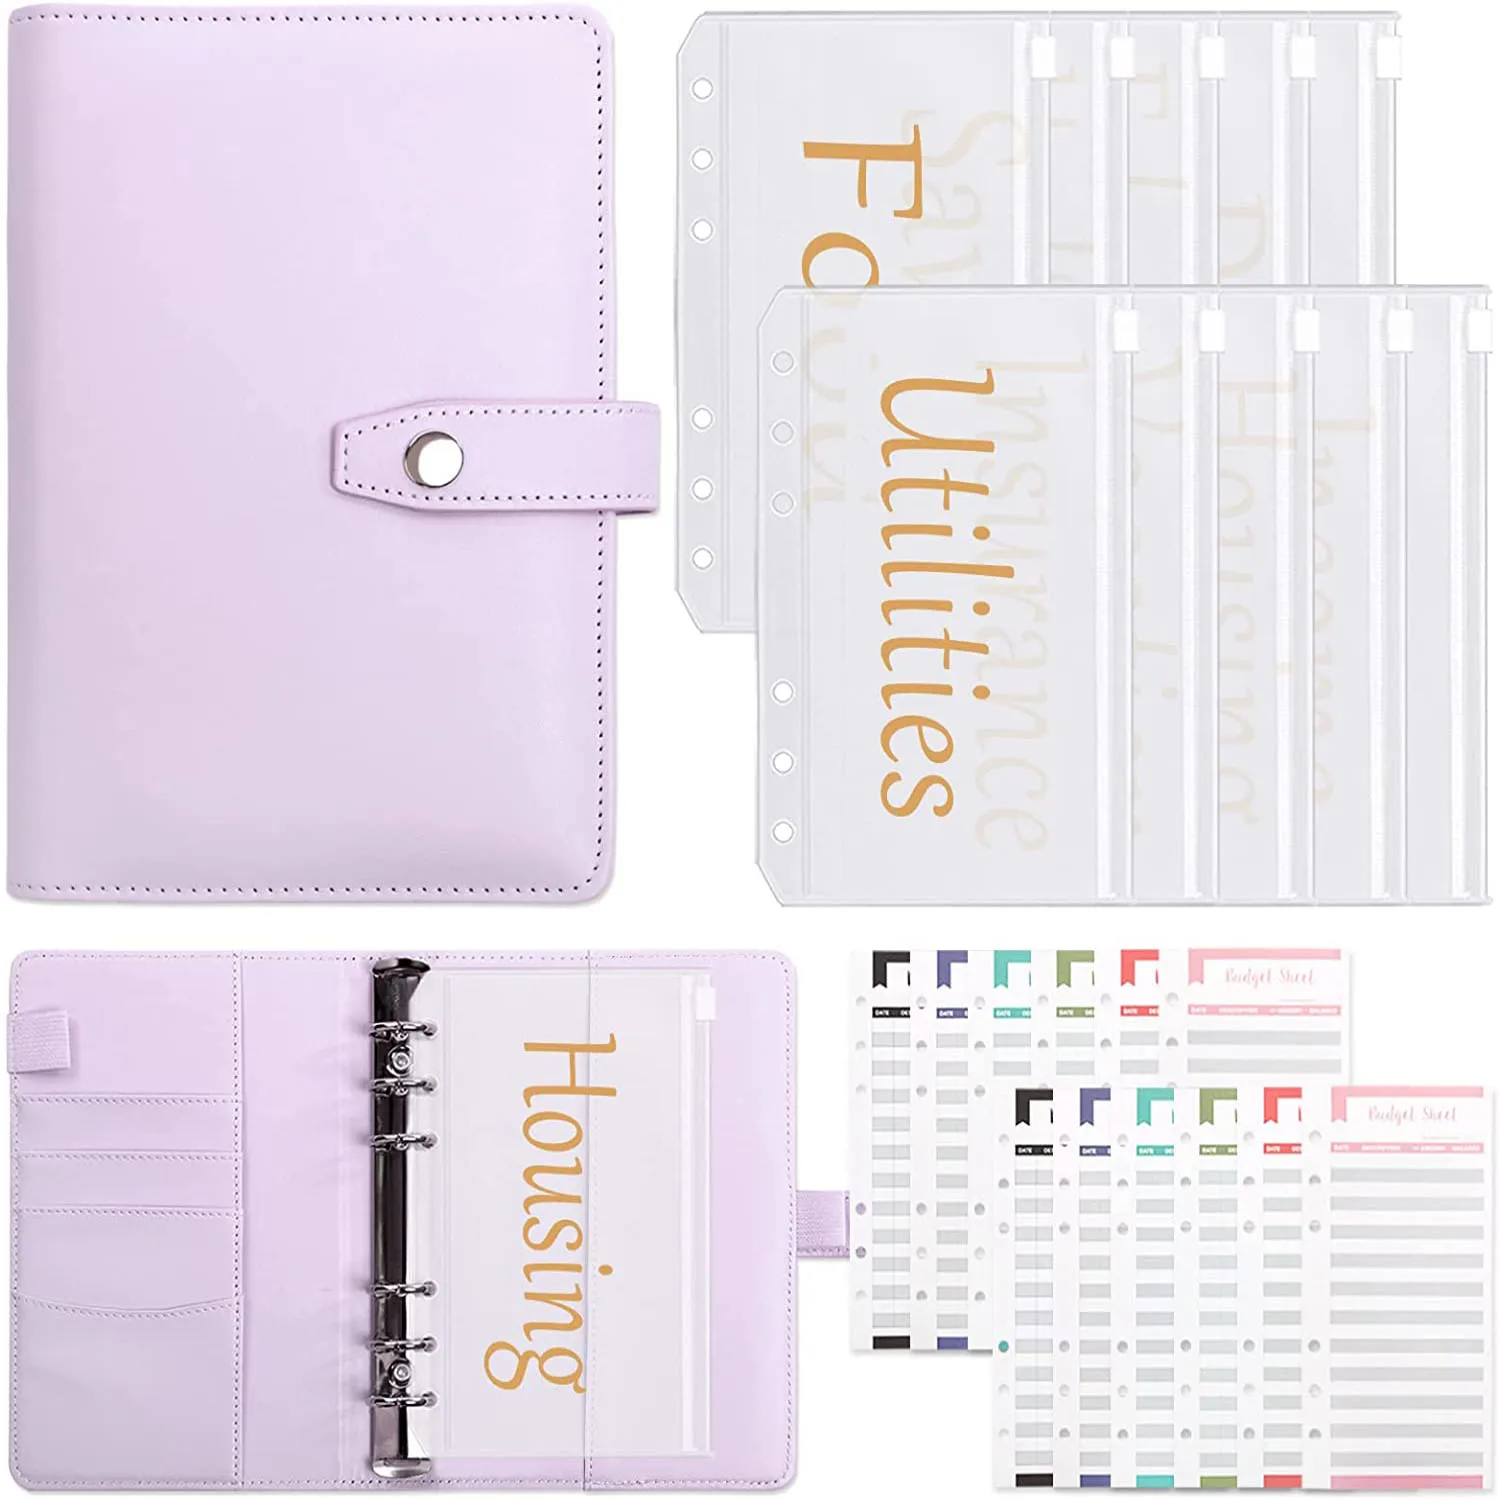 A6 Budget Binder with 10pcs Pre-printed Cash Envelopes for Budgeting,12 Expense Budget Sheets,Planner Organizer for Saving Money a6 budget binder money saving cash envelope planner with 8 binder zipper pockets 12 expense budget sheets and 2 label stickers